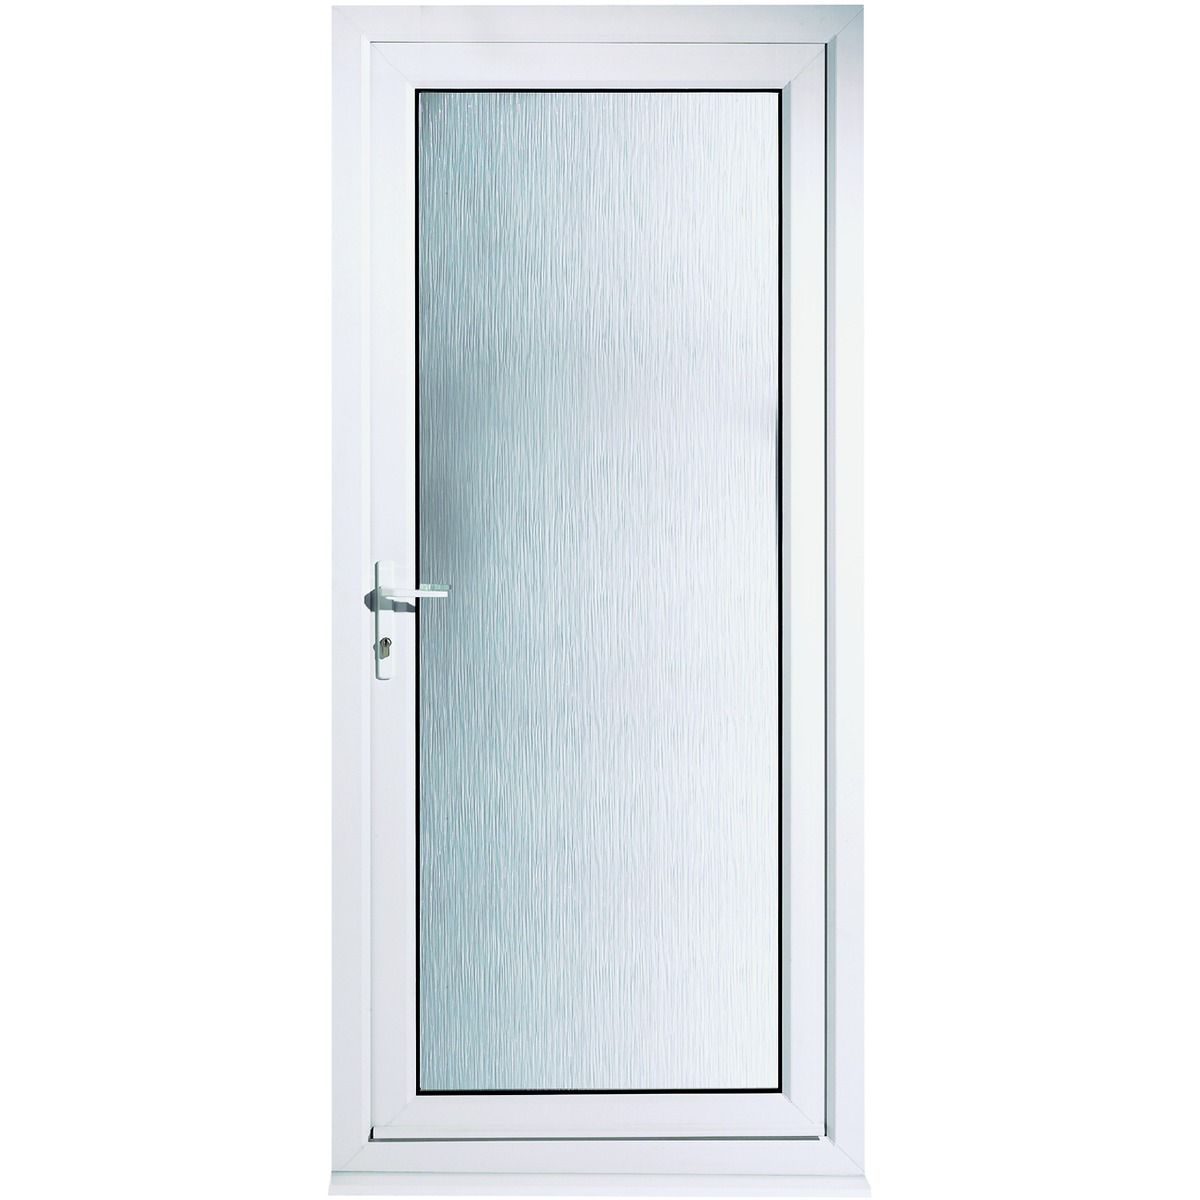 Image of Euramax Humber Right Hand Hung Pre-hung uPVC White Door - 2085 x 840mm